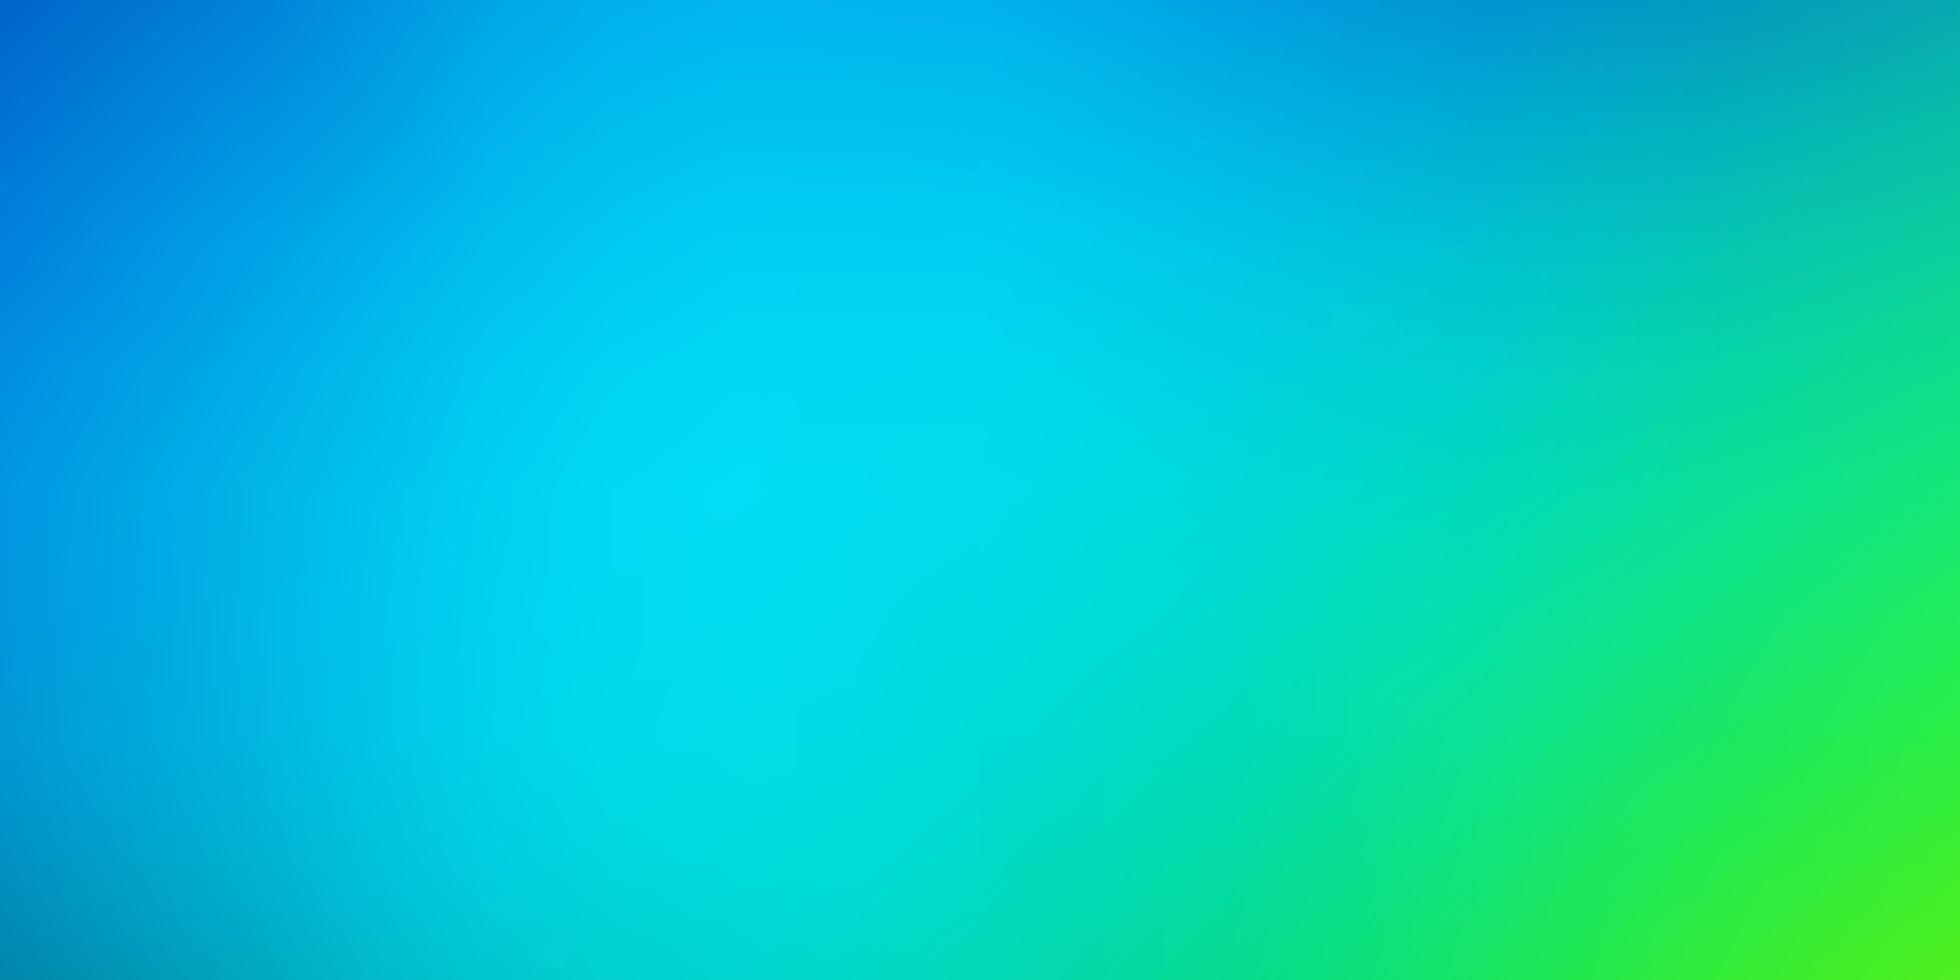 Light Blue, Green vector abstract blurred background. Abstract colorful illustration with gradient. Base for your app design.